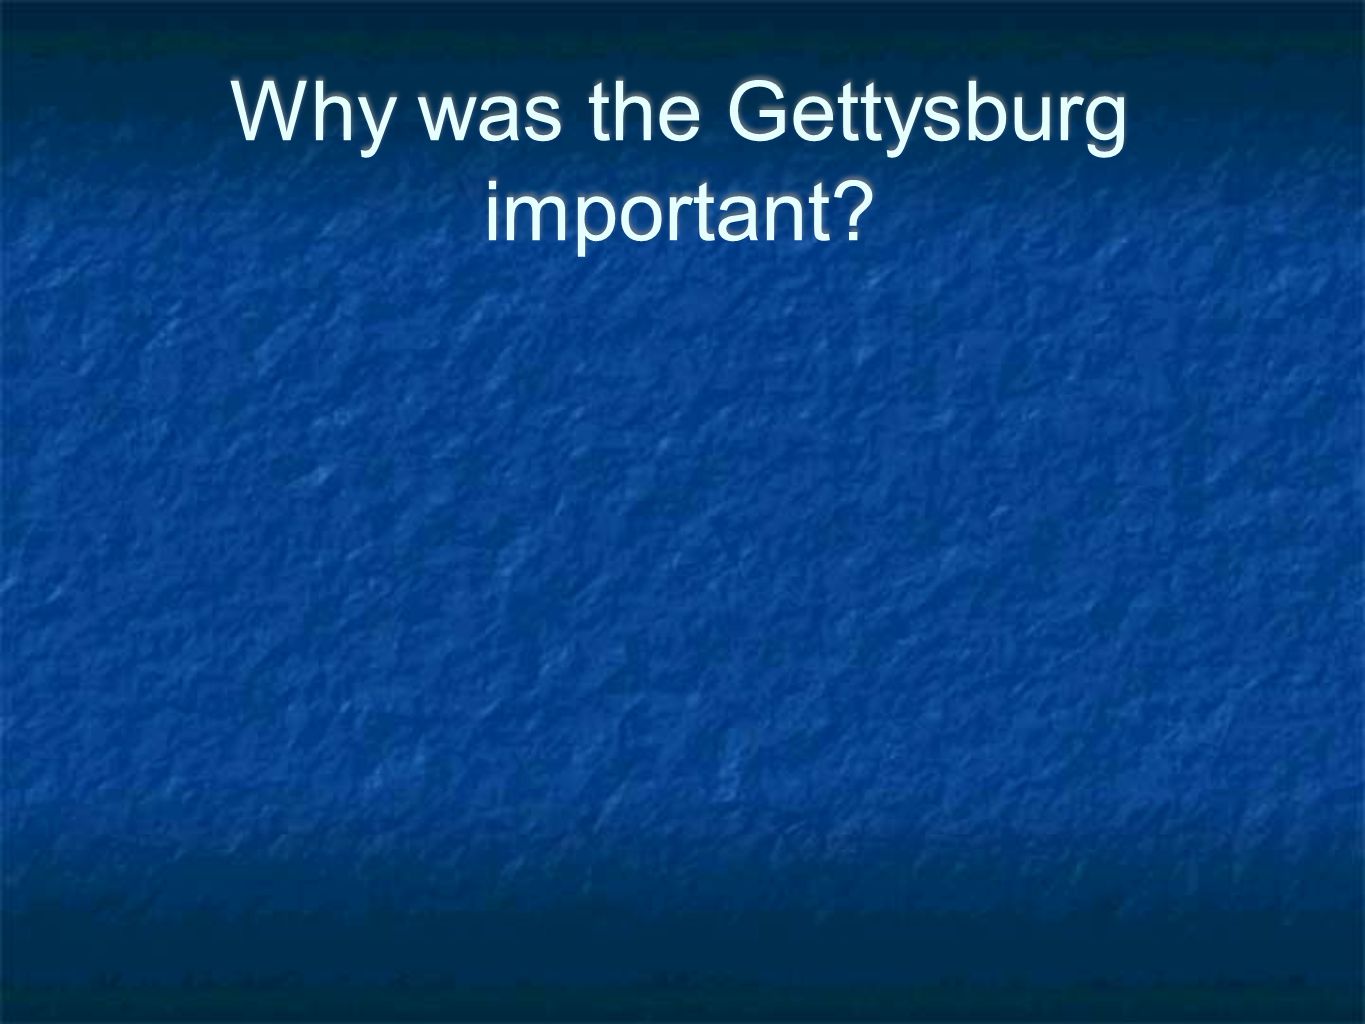 Why was the Gettysburg important